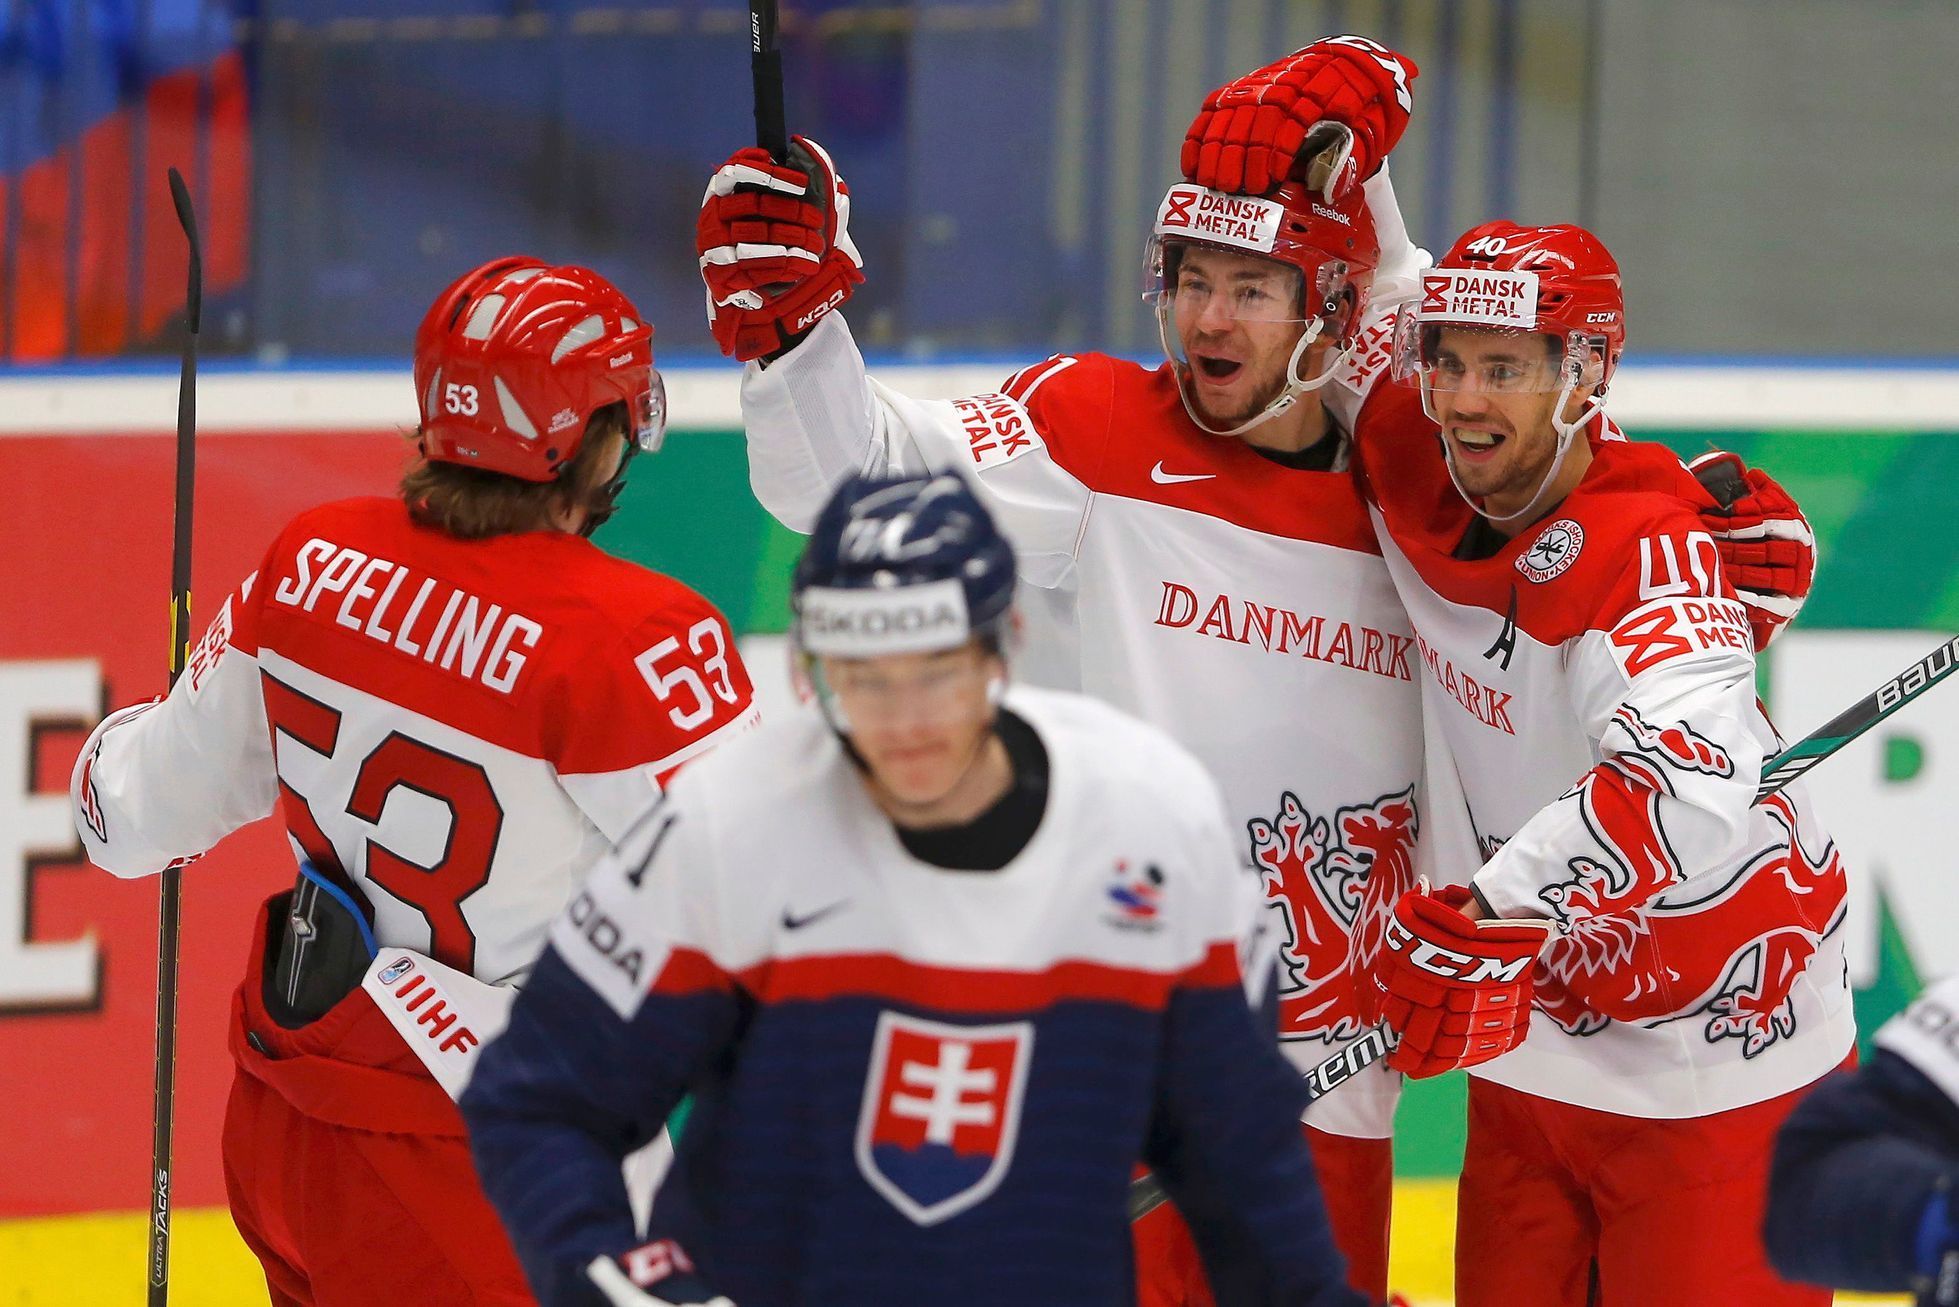 Denmark's Bjorkstrand celebrates his goal against Slovakia with his teammates Jensen and Spelling during their Ice Hockey World Championship game at the CEZ arena in Ostrava